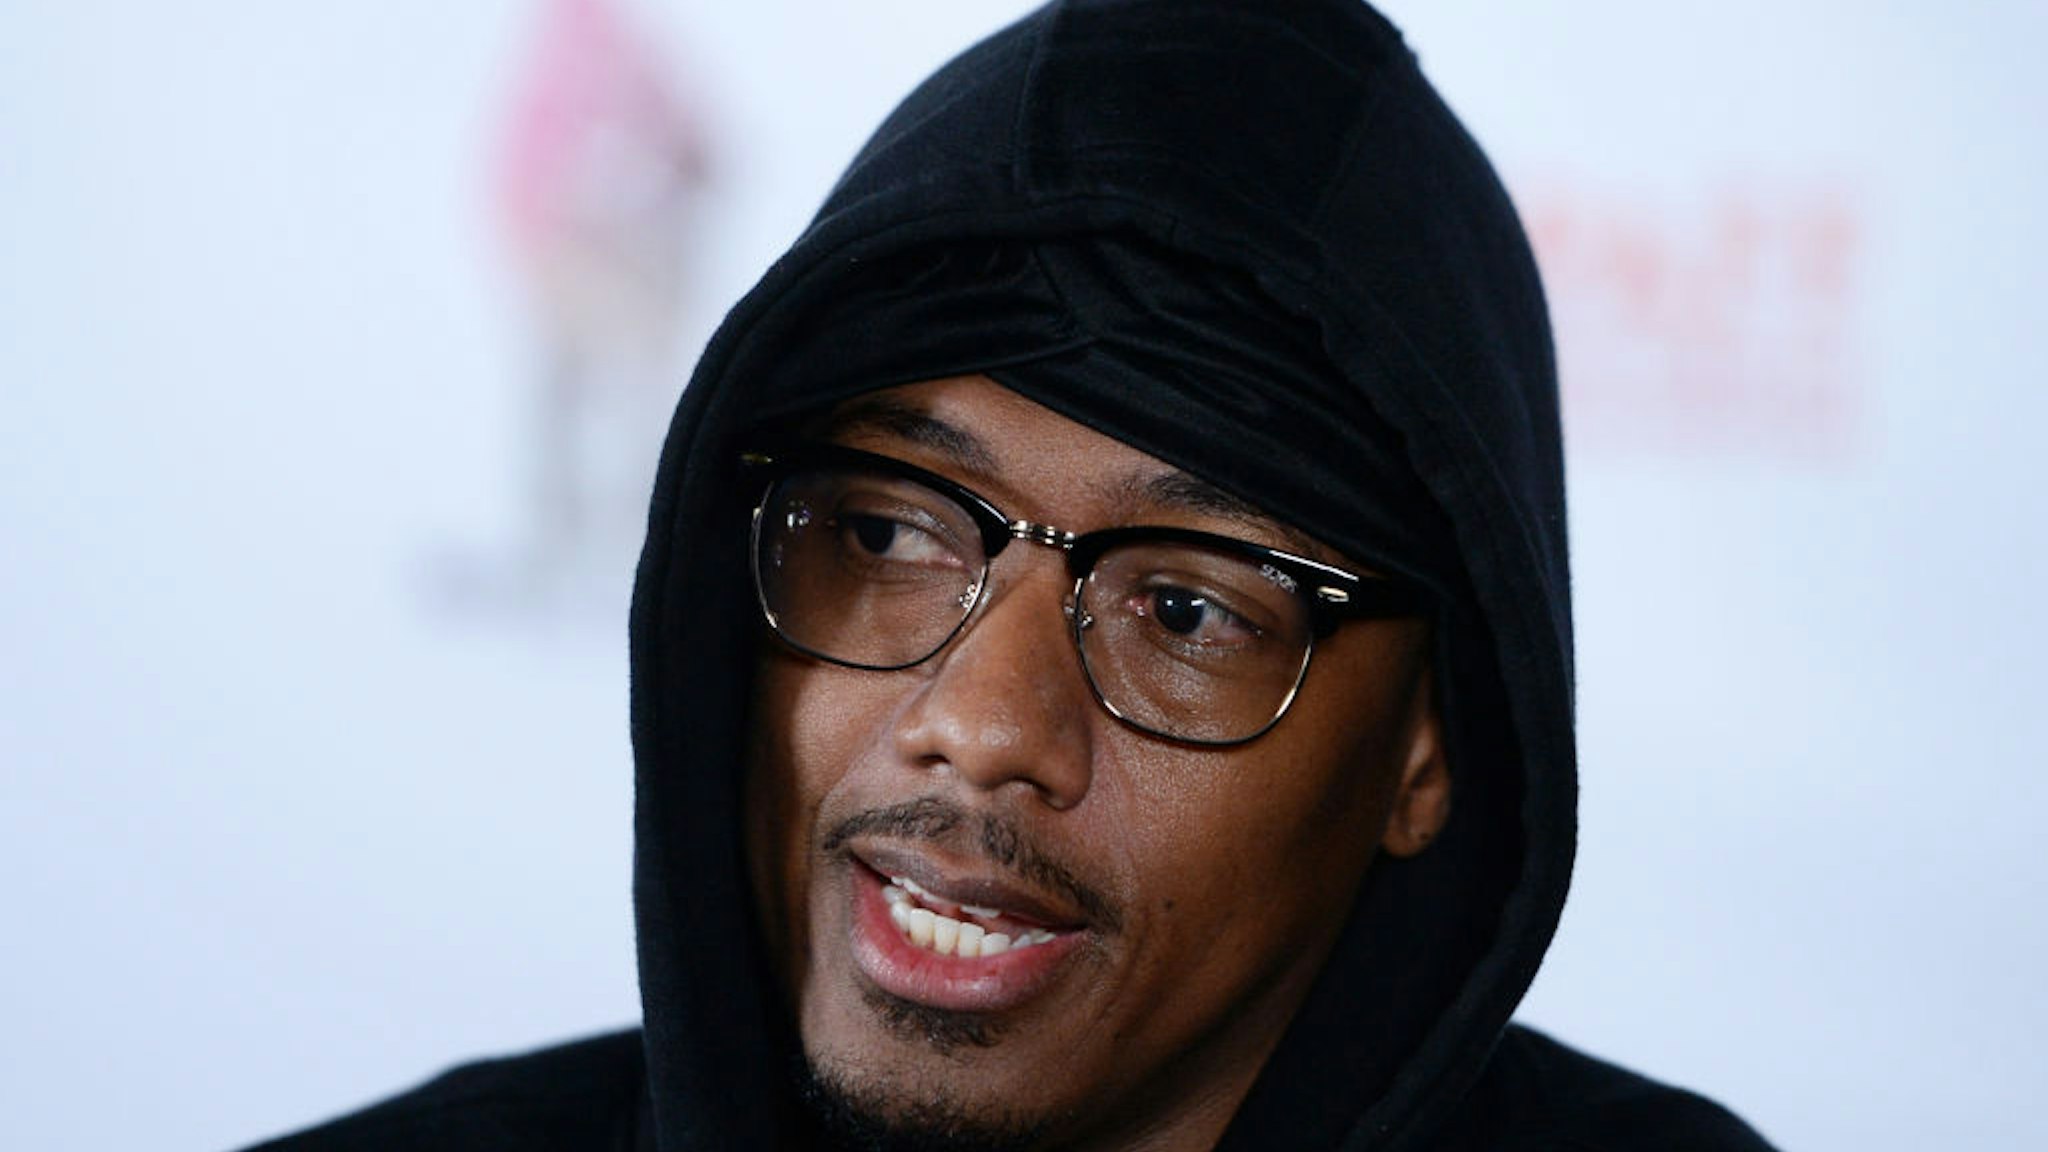 Director Nick Cannon arrives at the 28th Annual Pan African Film Festival - "She Ball" Premiere at Cinemark Baldwin Hills on February 21, 2020 in Los Angeles, California.